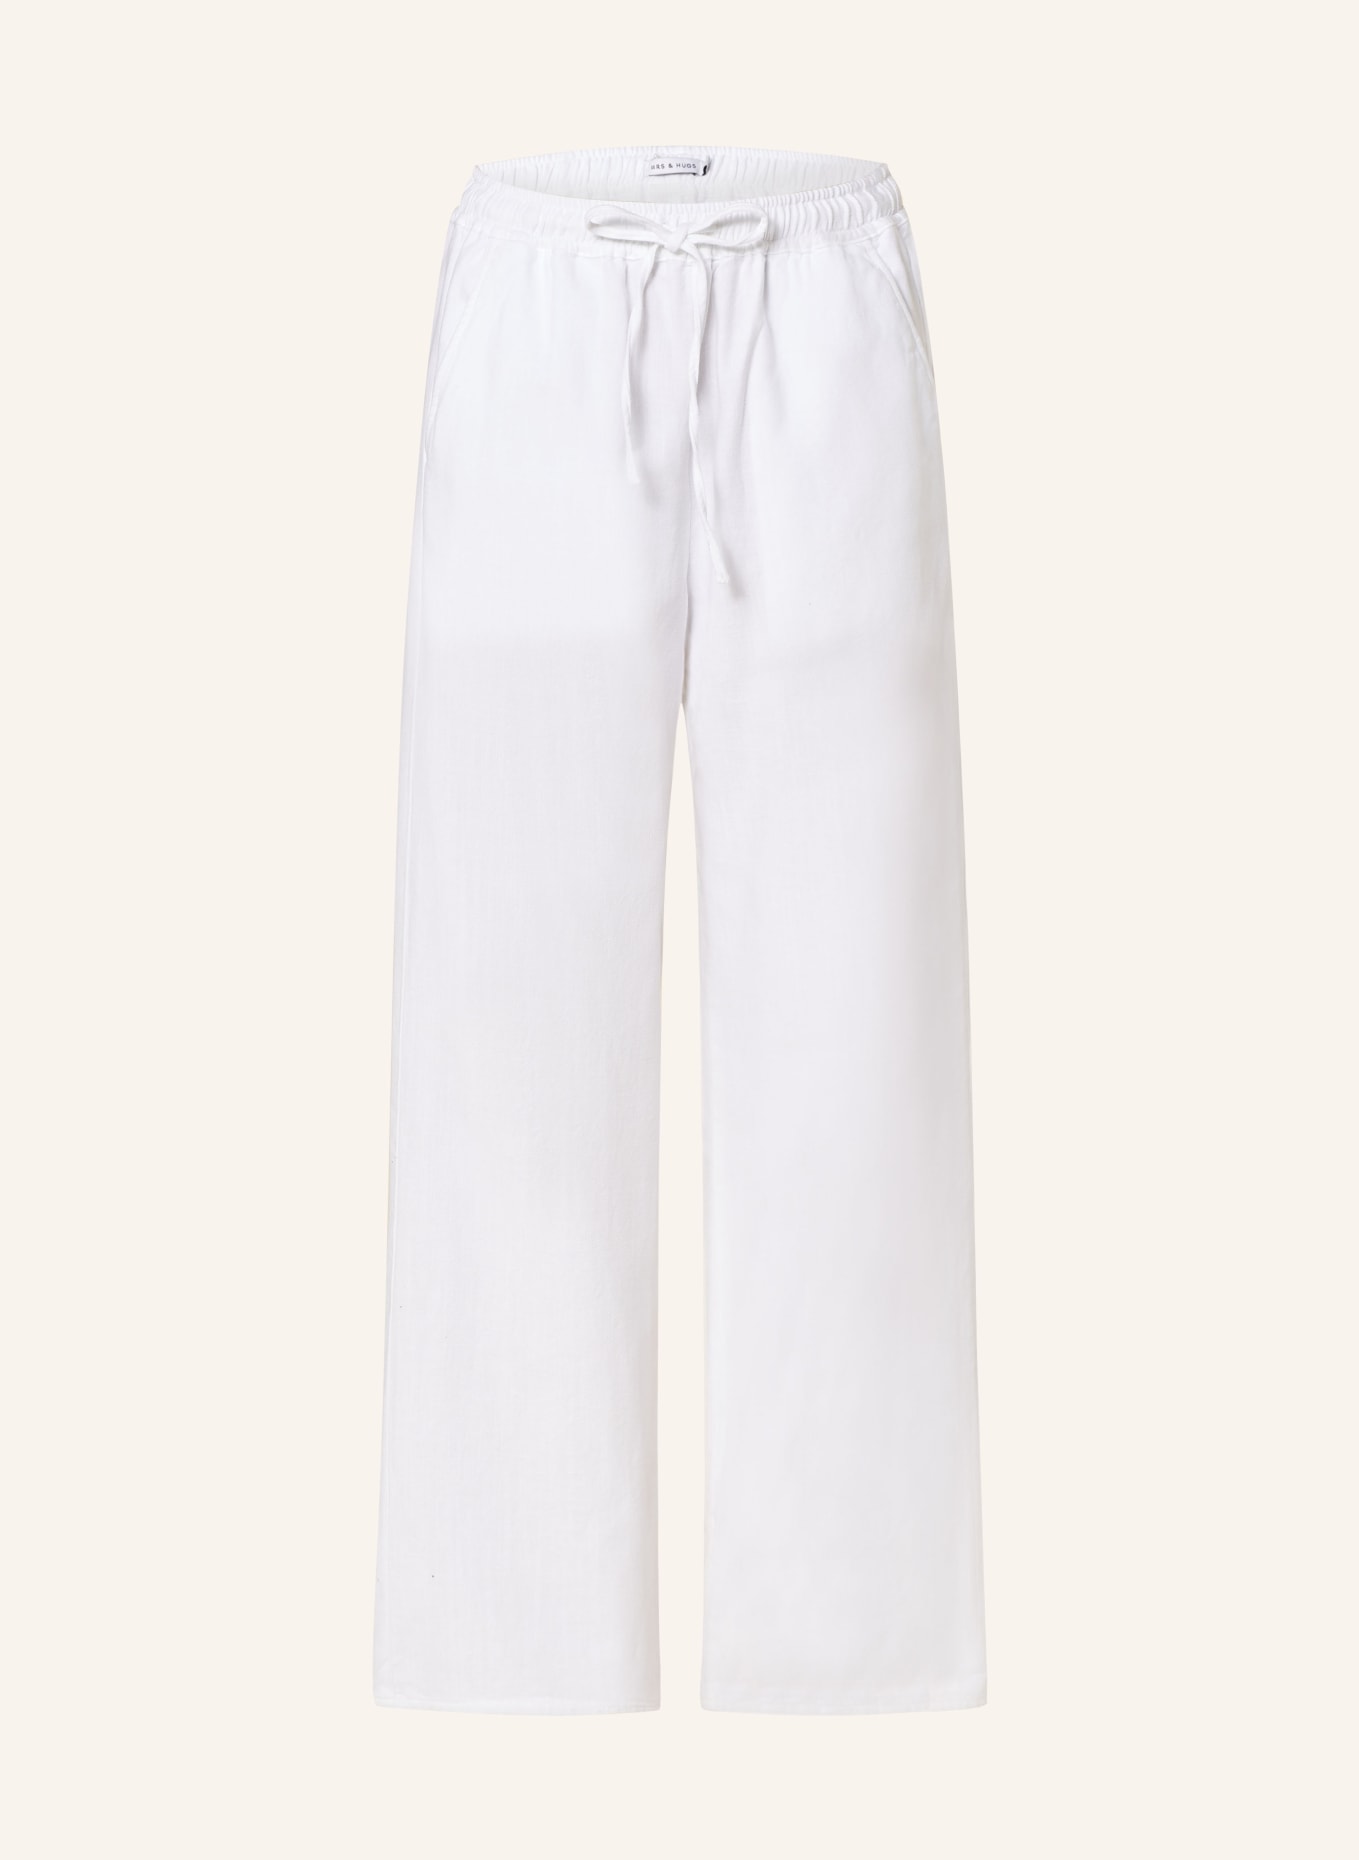 MRS & HUGS Pants in jogger style, Color: WHITE (Image 1)